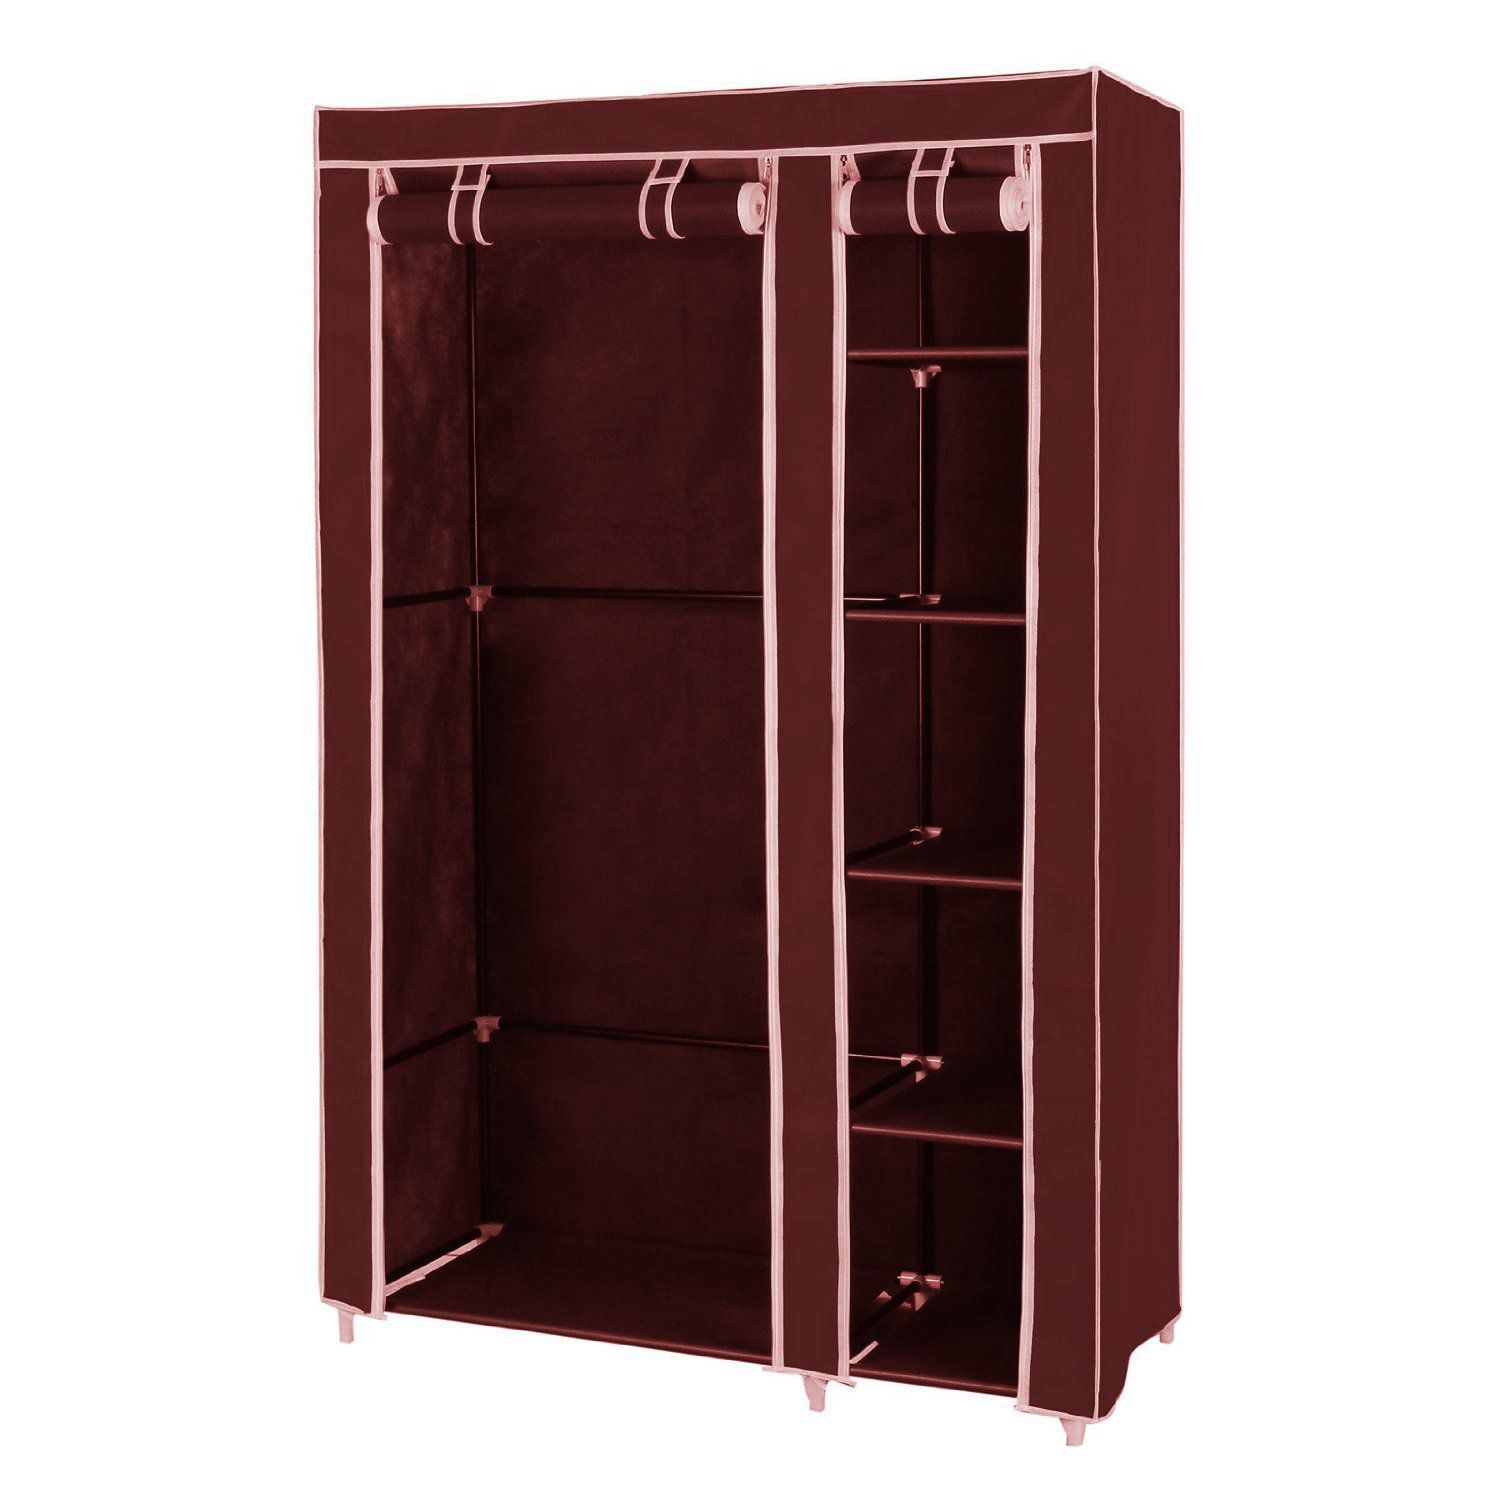     			House of Quirk Fancy & Portable Closet  Foldable Wardrobe / Foldable Almirah Cabinet Storage Organizer Cupboard Almirah Foldable Storage Rack Collapsible Cabinet